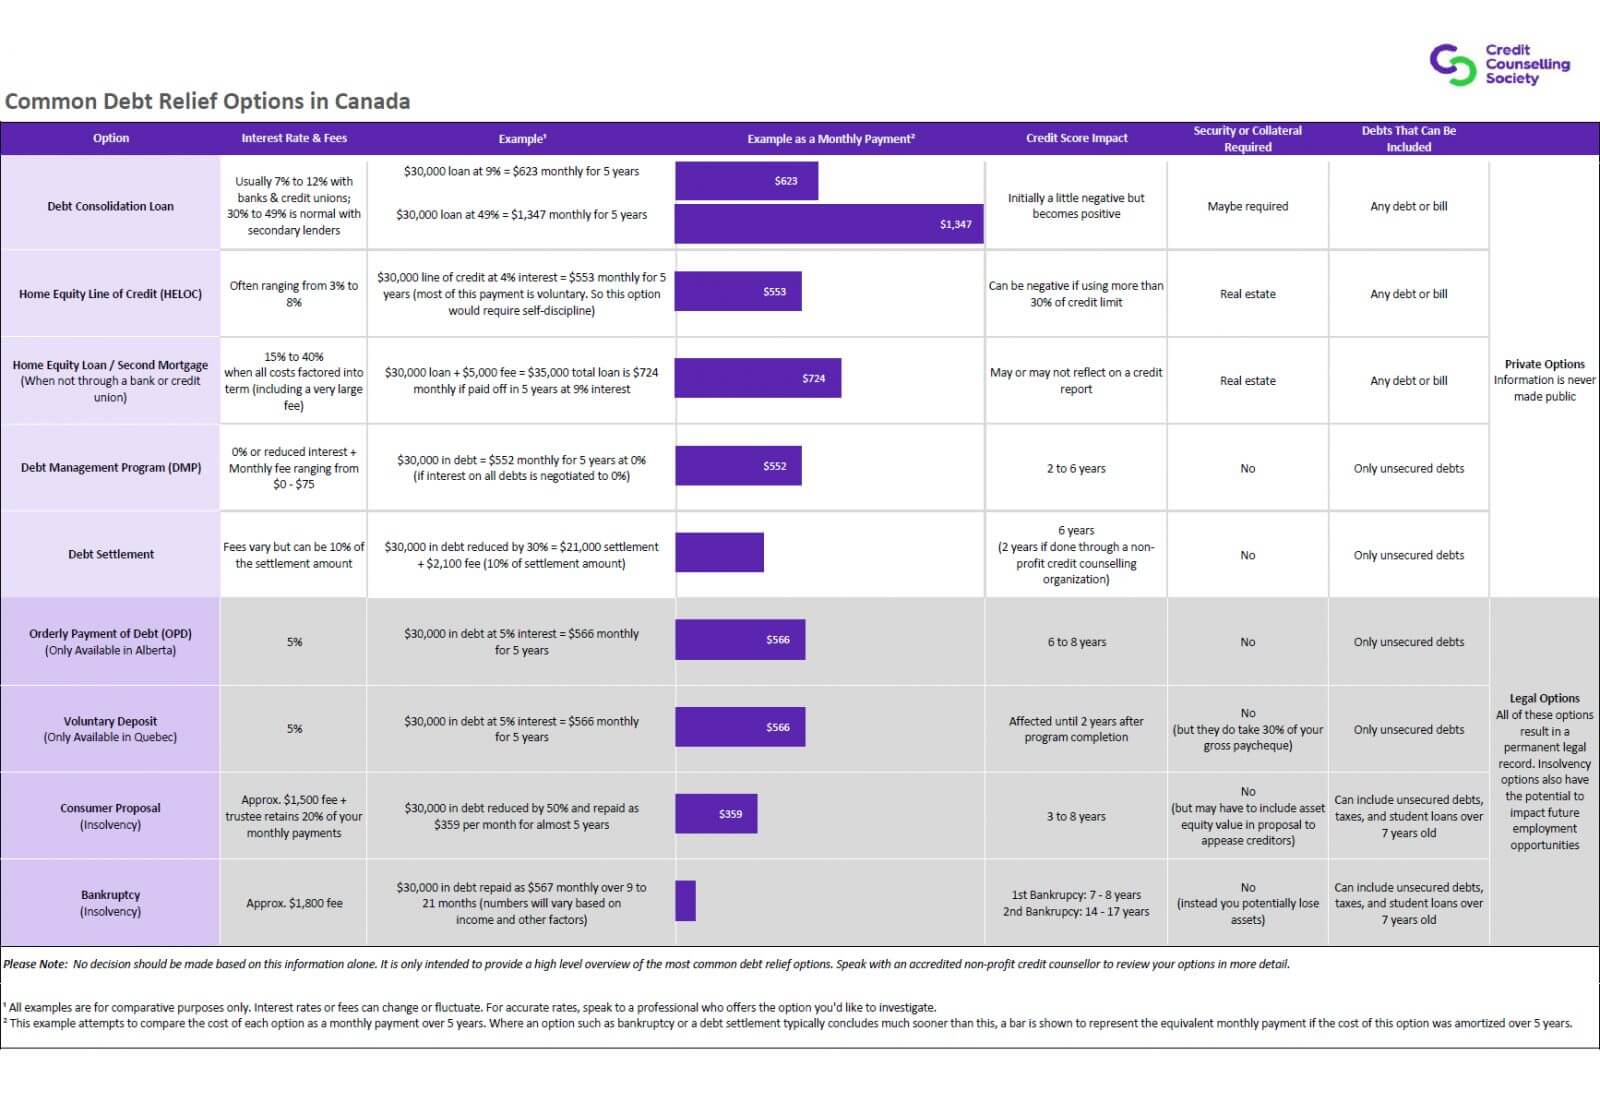 A comparison chart of a consumer proposal vs bankruptcy, a debt management program, credit counselling, and a debt settlement.